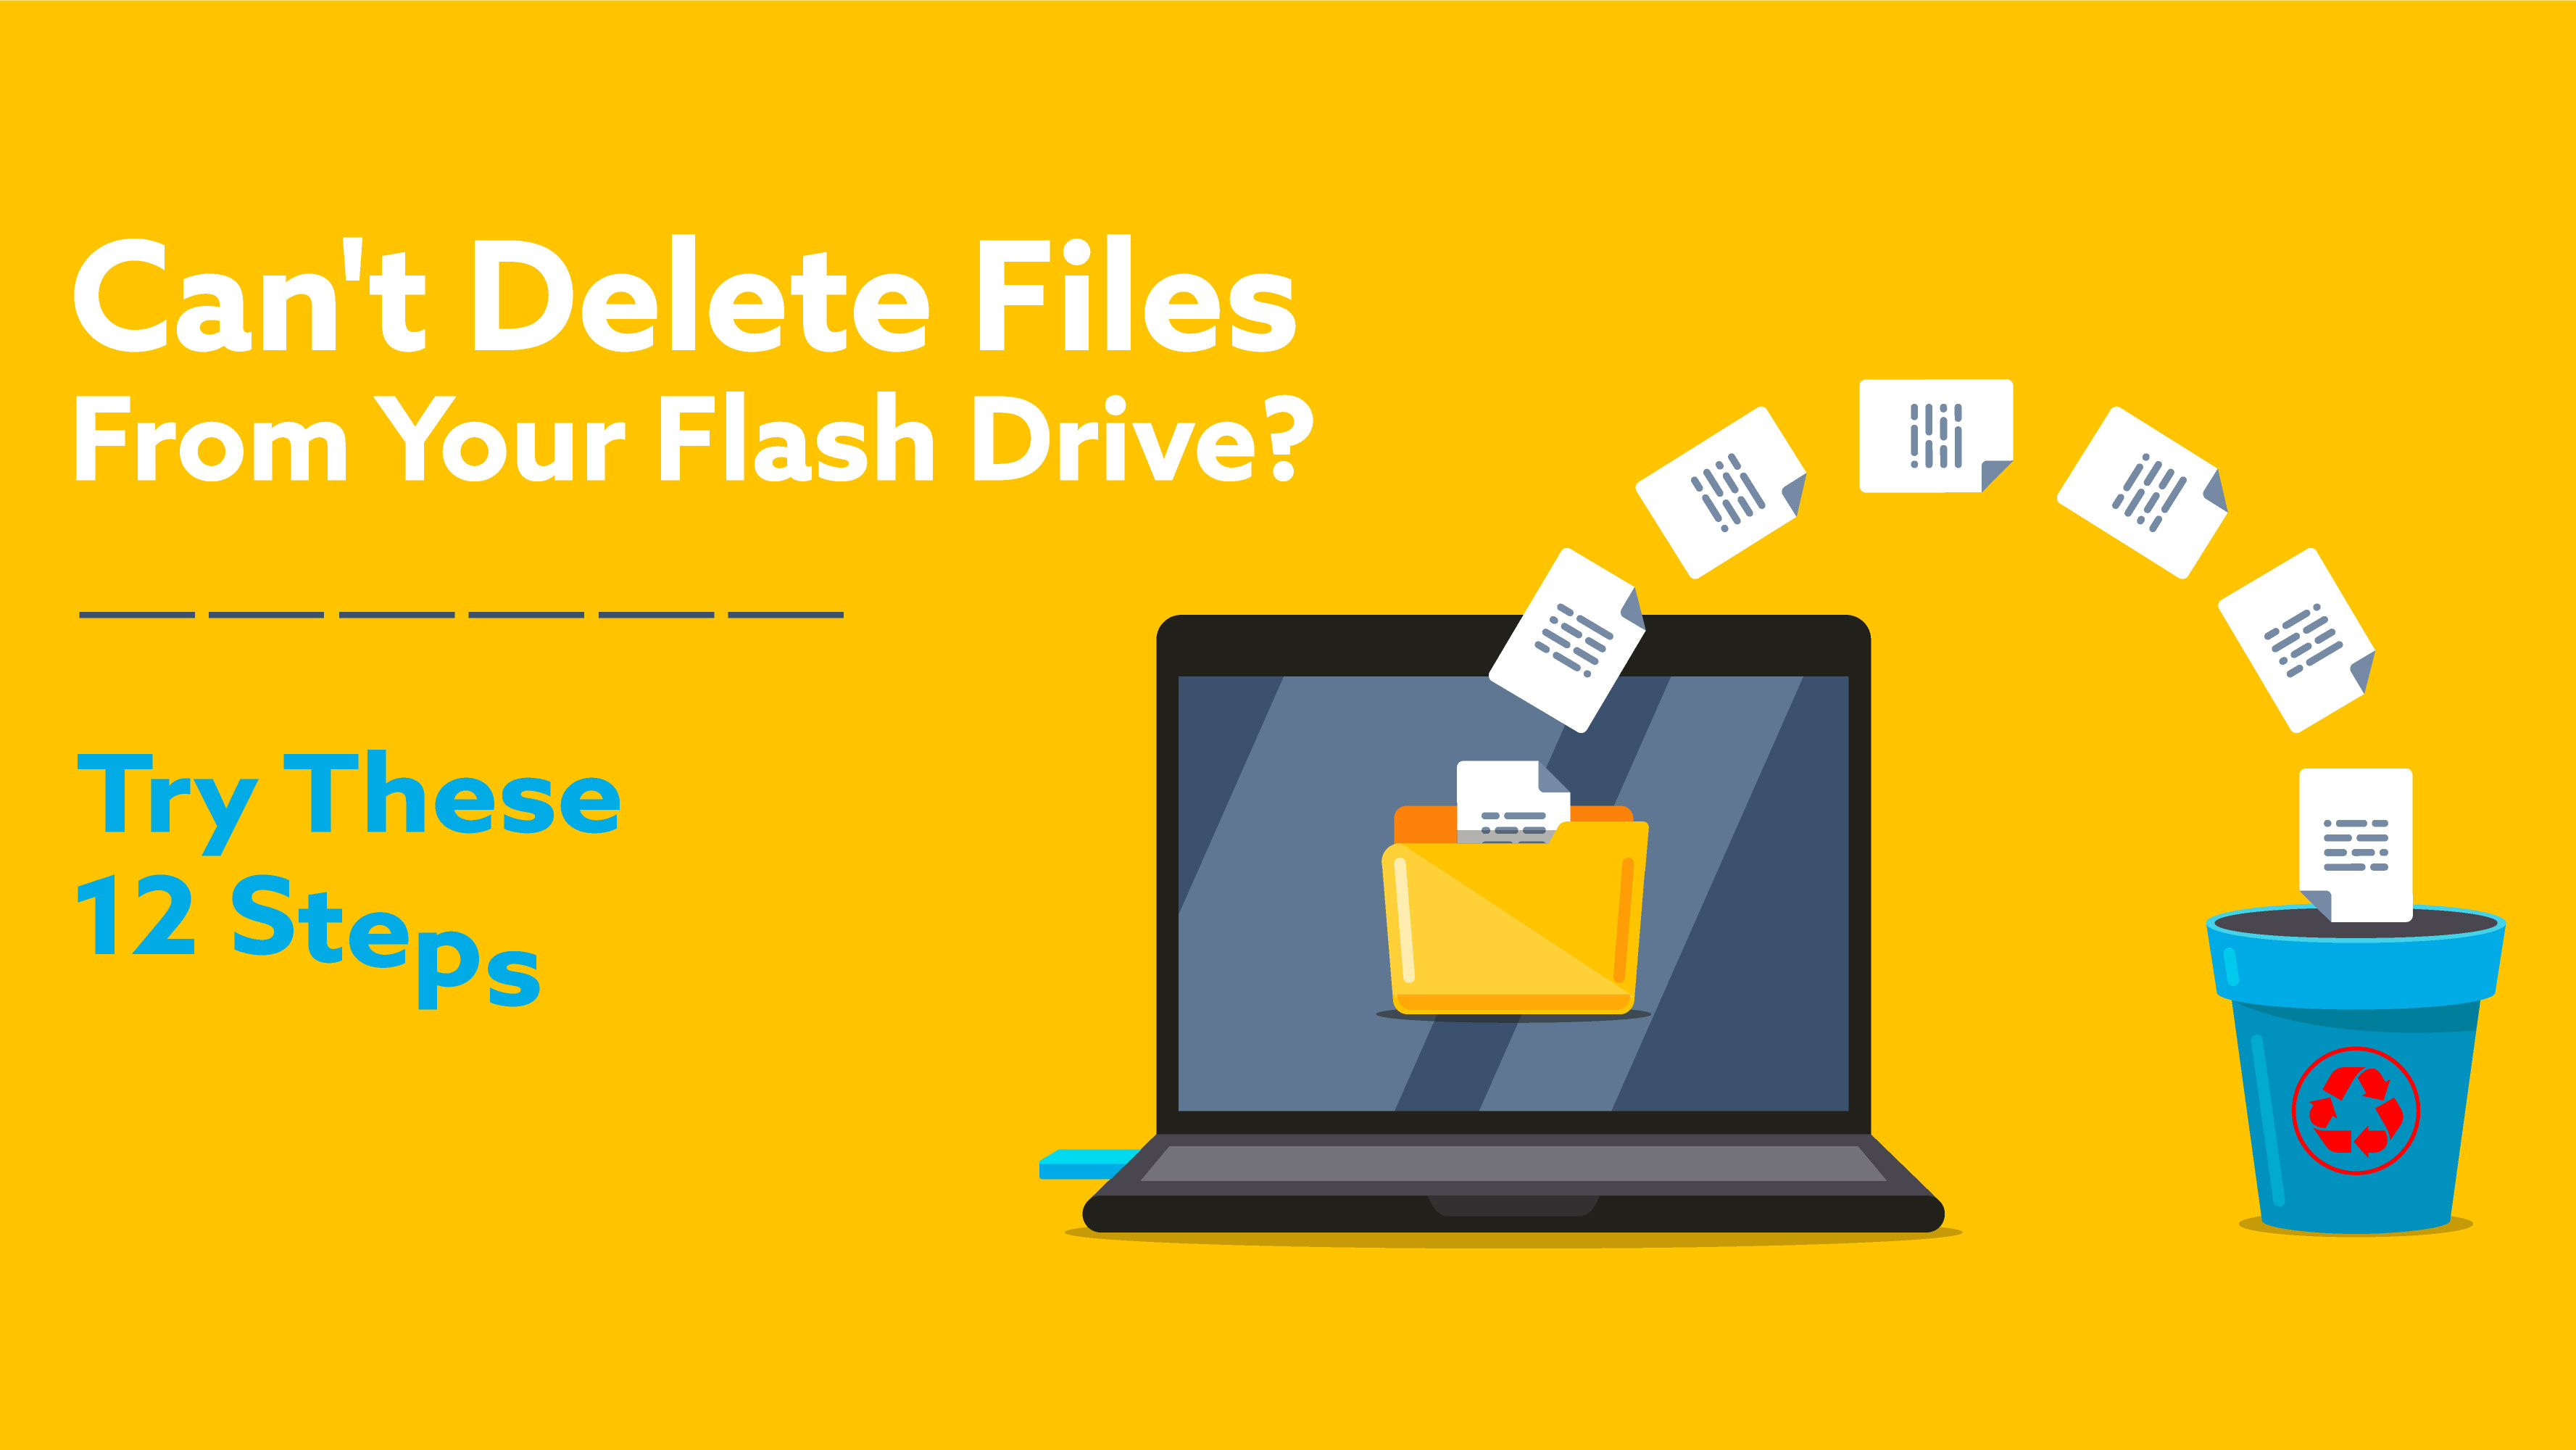 Can't Delete Files From Your Flash Drive?